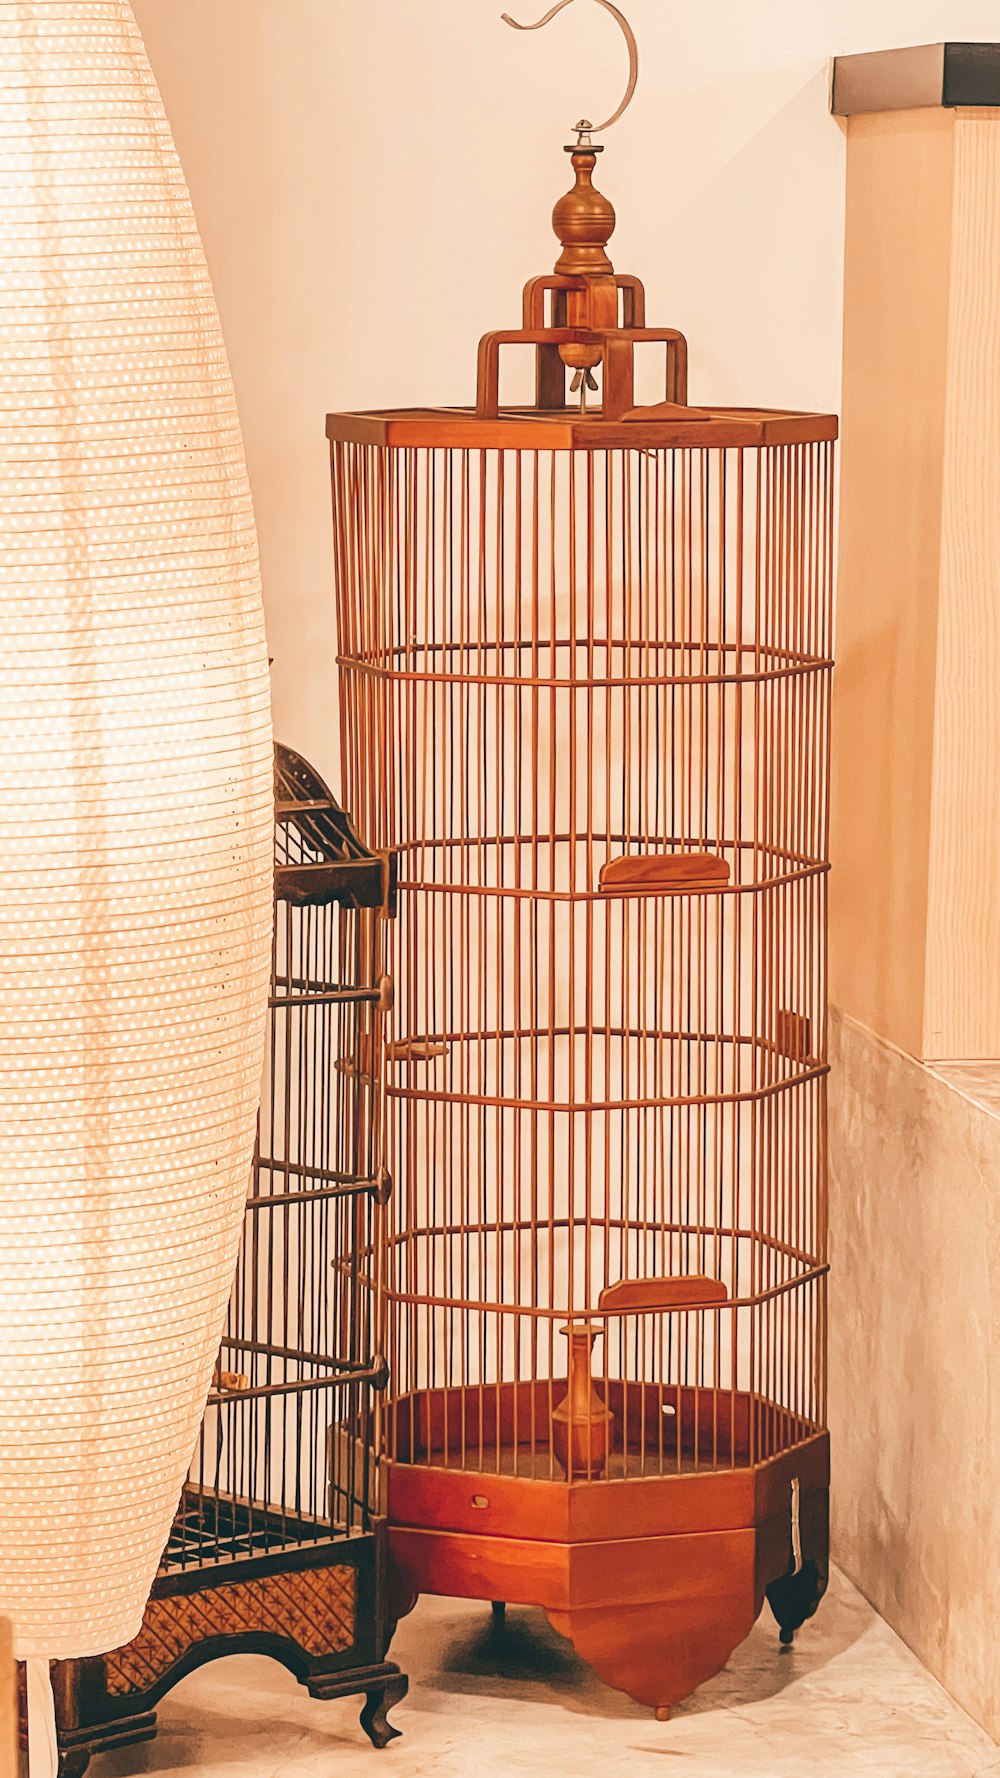 a bird cage sitting on top of a table next to a lamp